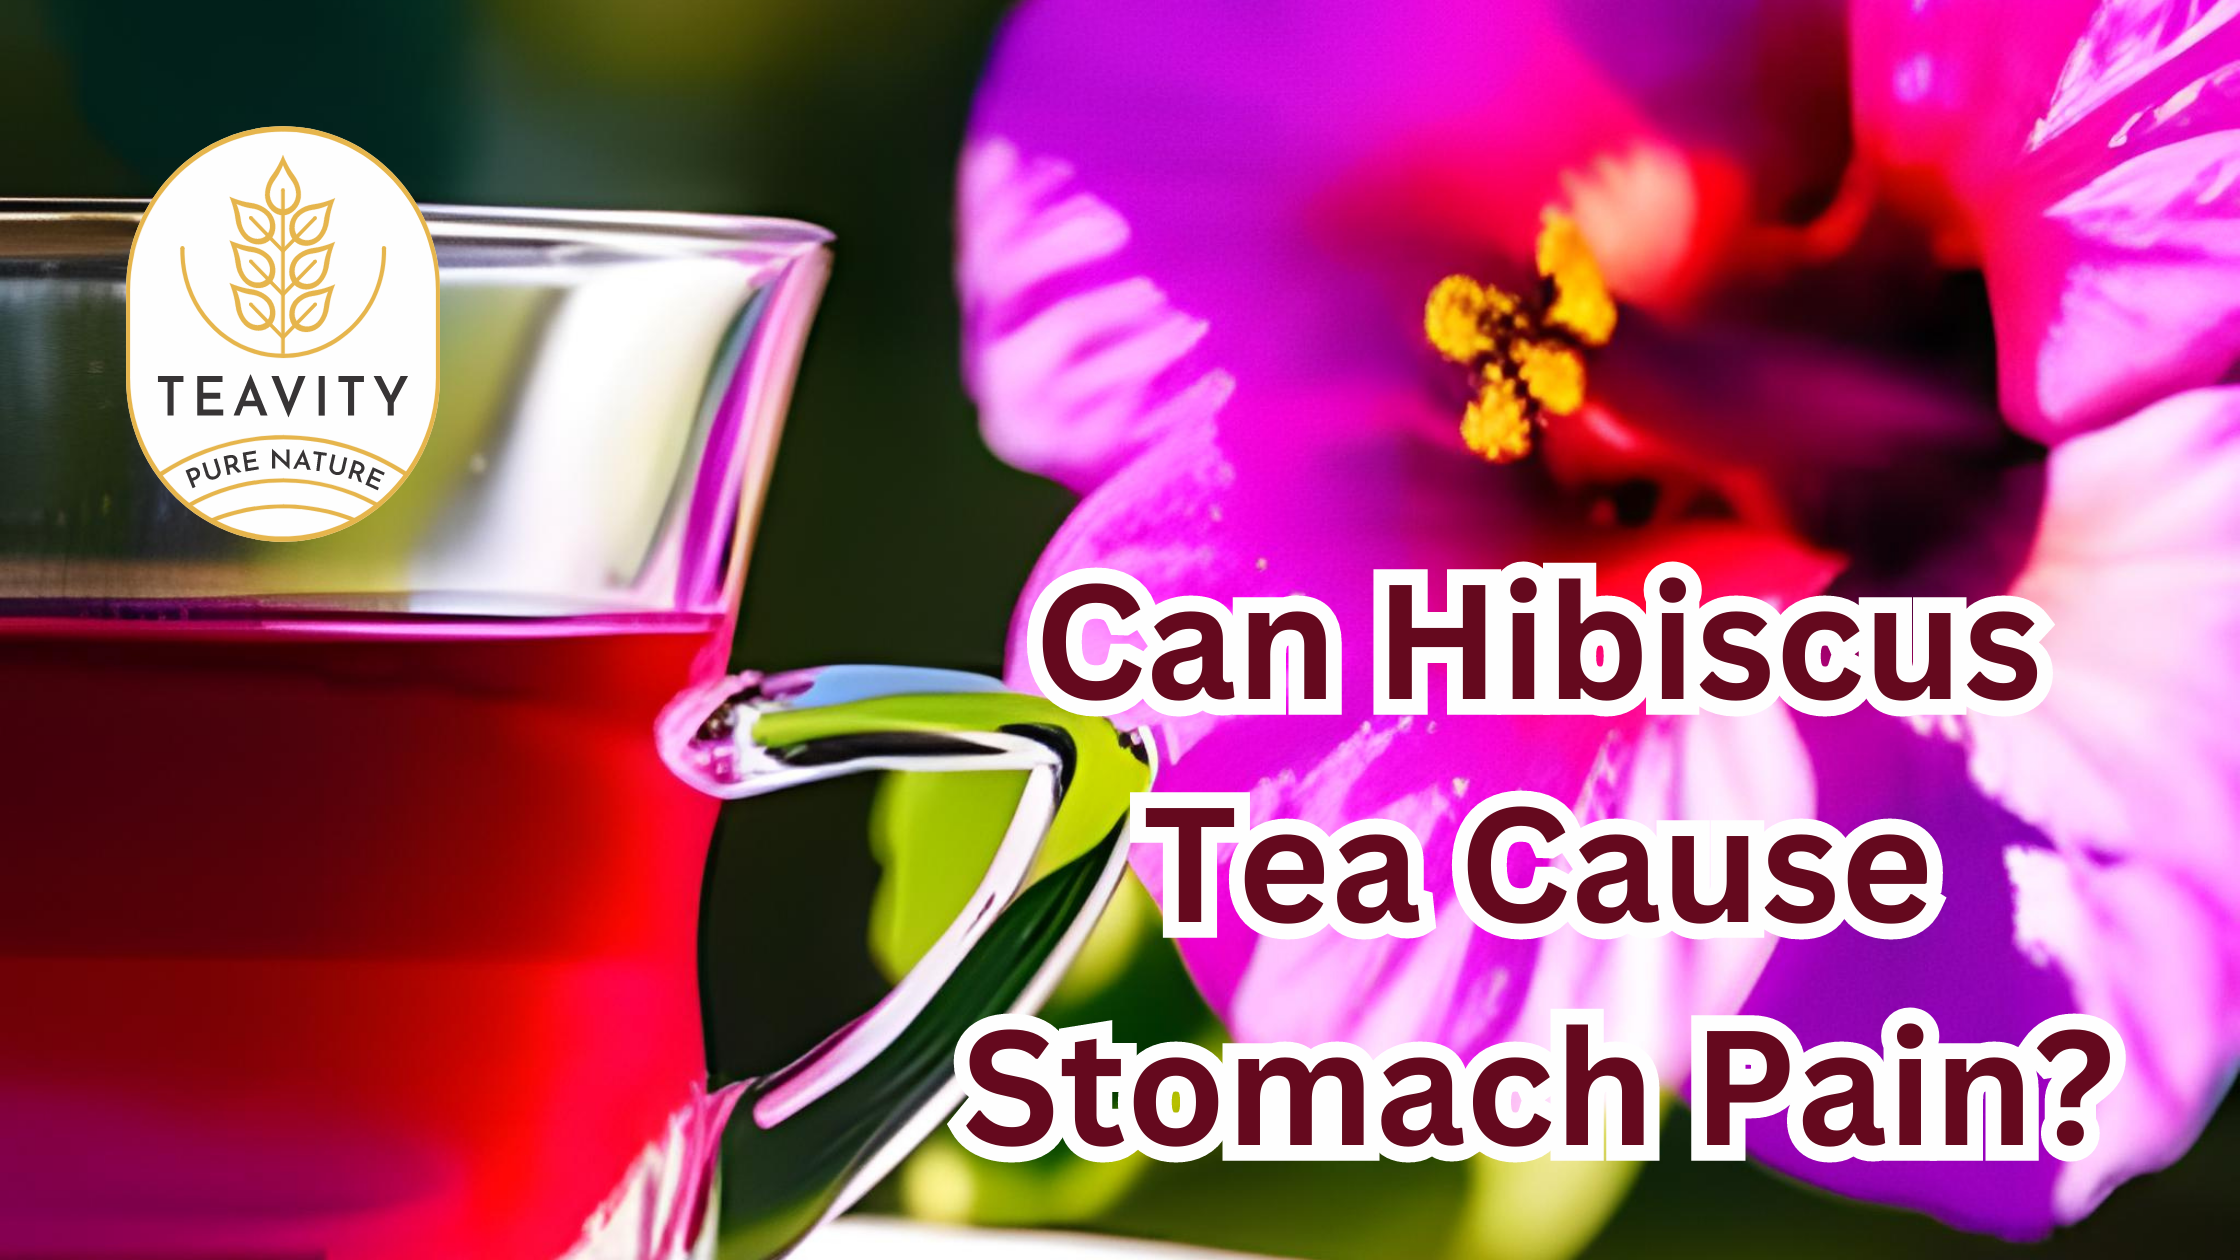 Can Hibiscus Tea Cause Stomach Pain?